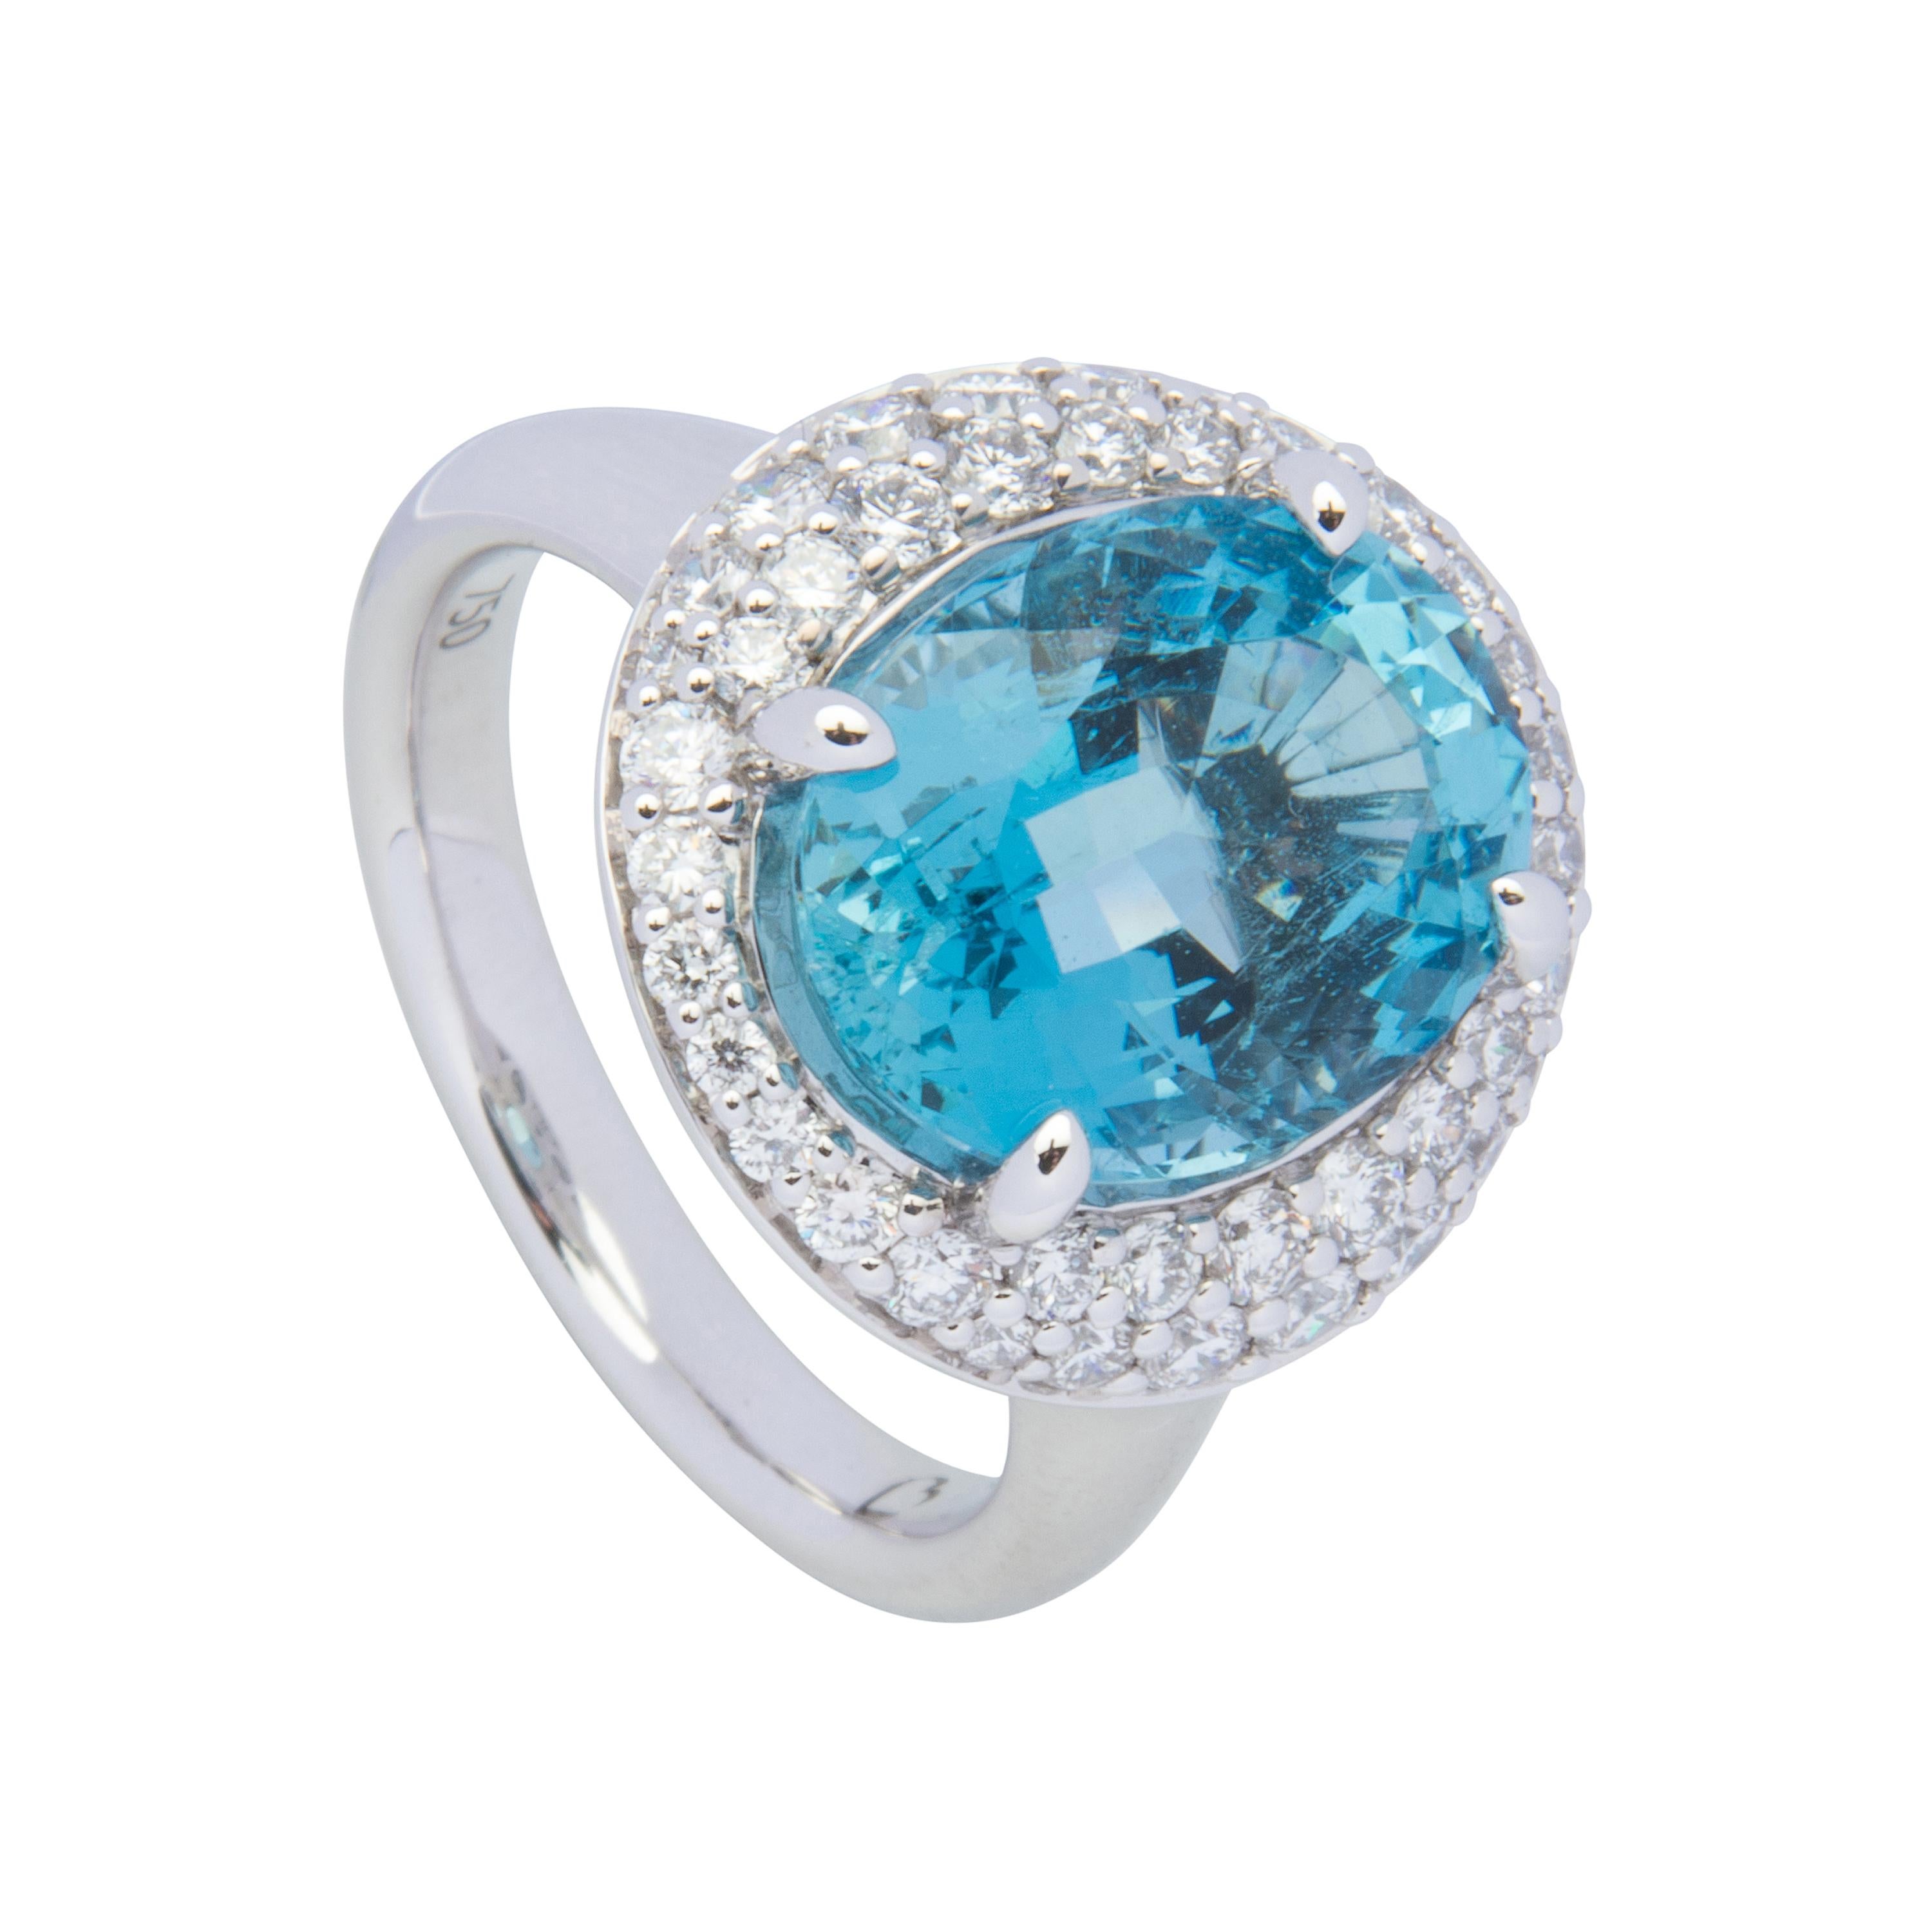 18 karat white gold cocktail ring featuring oval shape aquamarine 5.36ct and round brilliant cut diamonds totalling 0.81ct.  Size US6.5, sizeable +2 or -2.